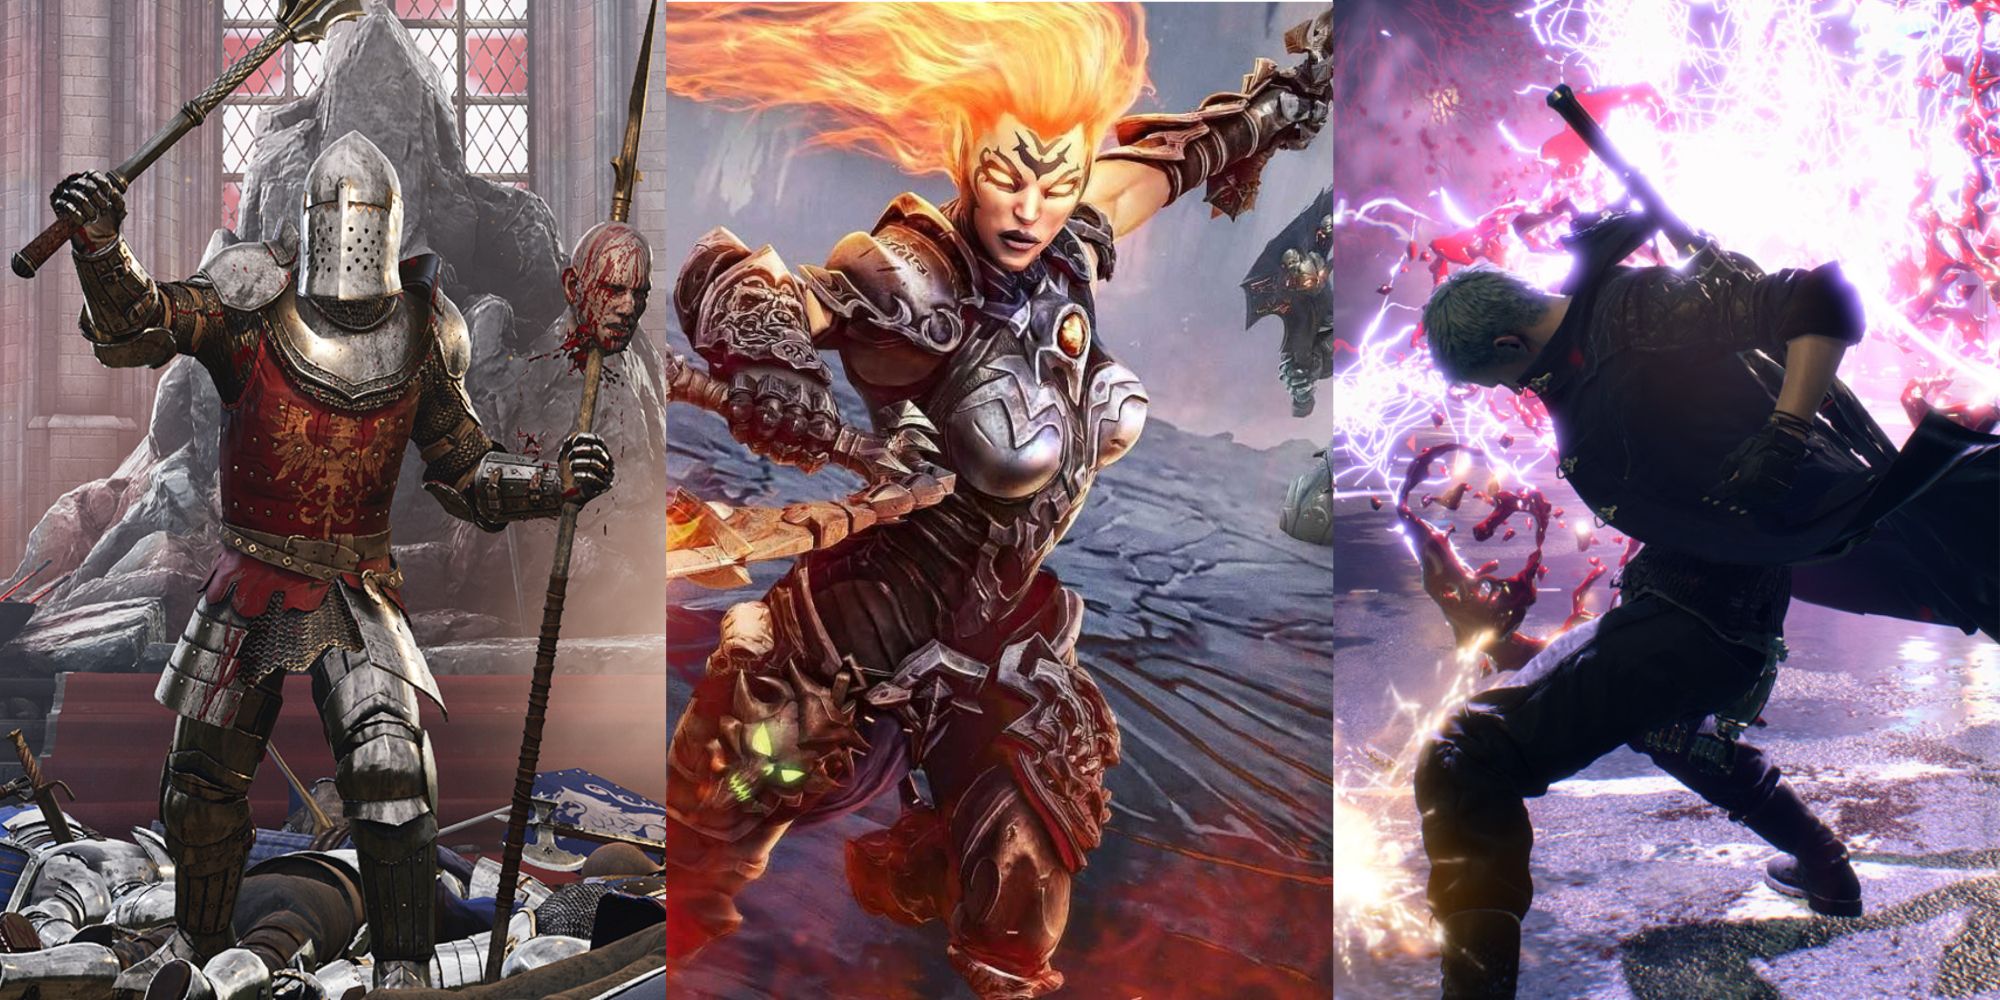 Split Image of Chivalry 2, Darksiders 3, and Devil May Cry 5